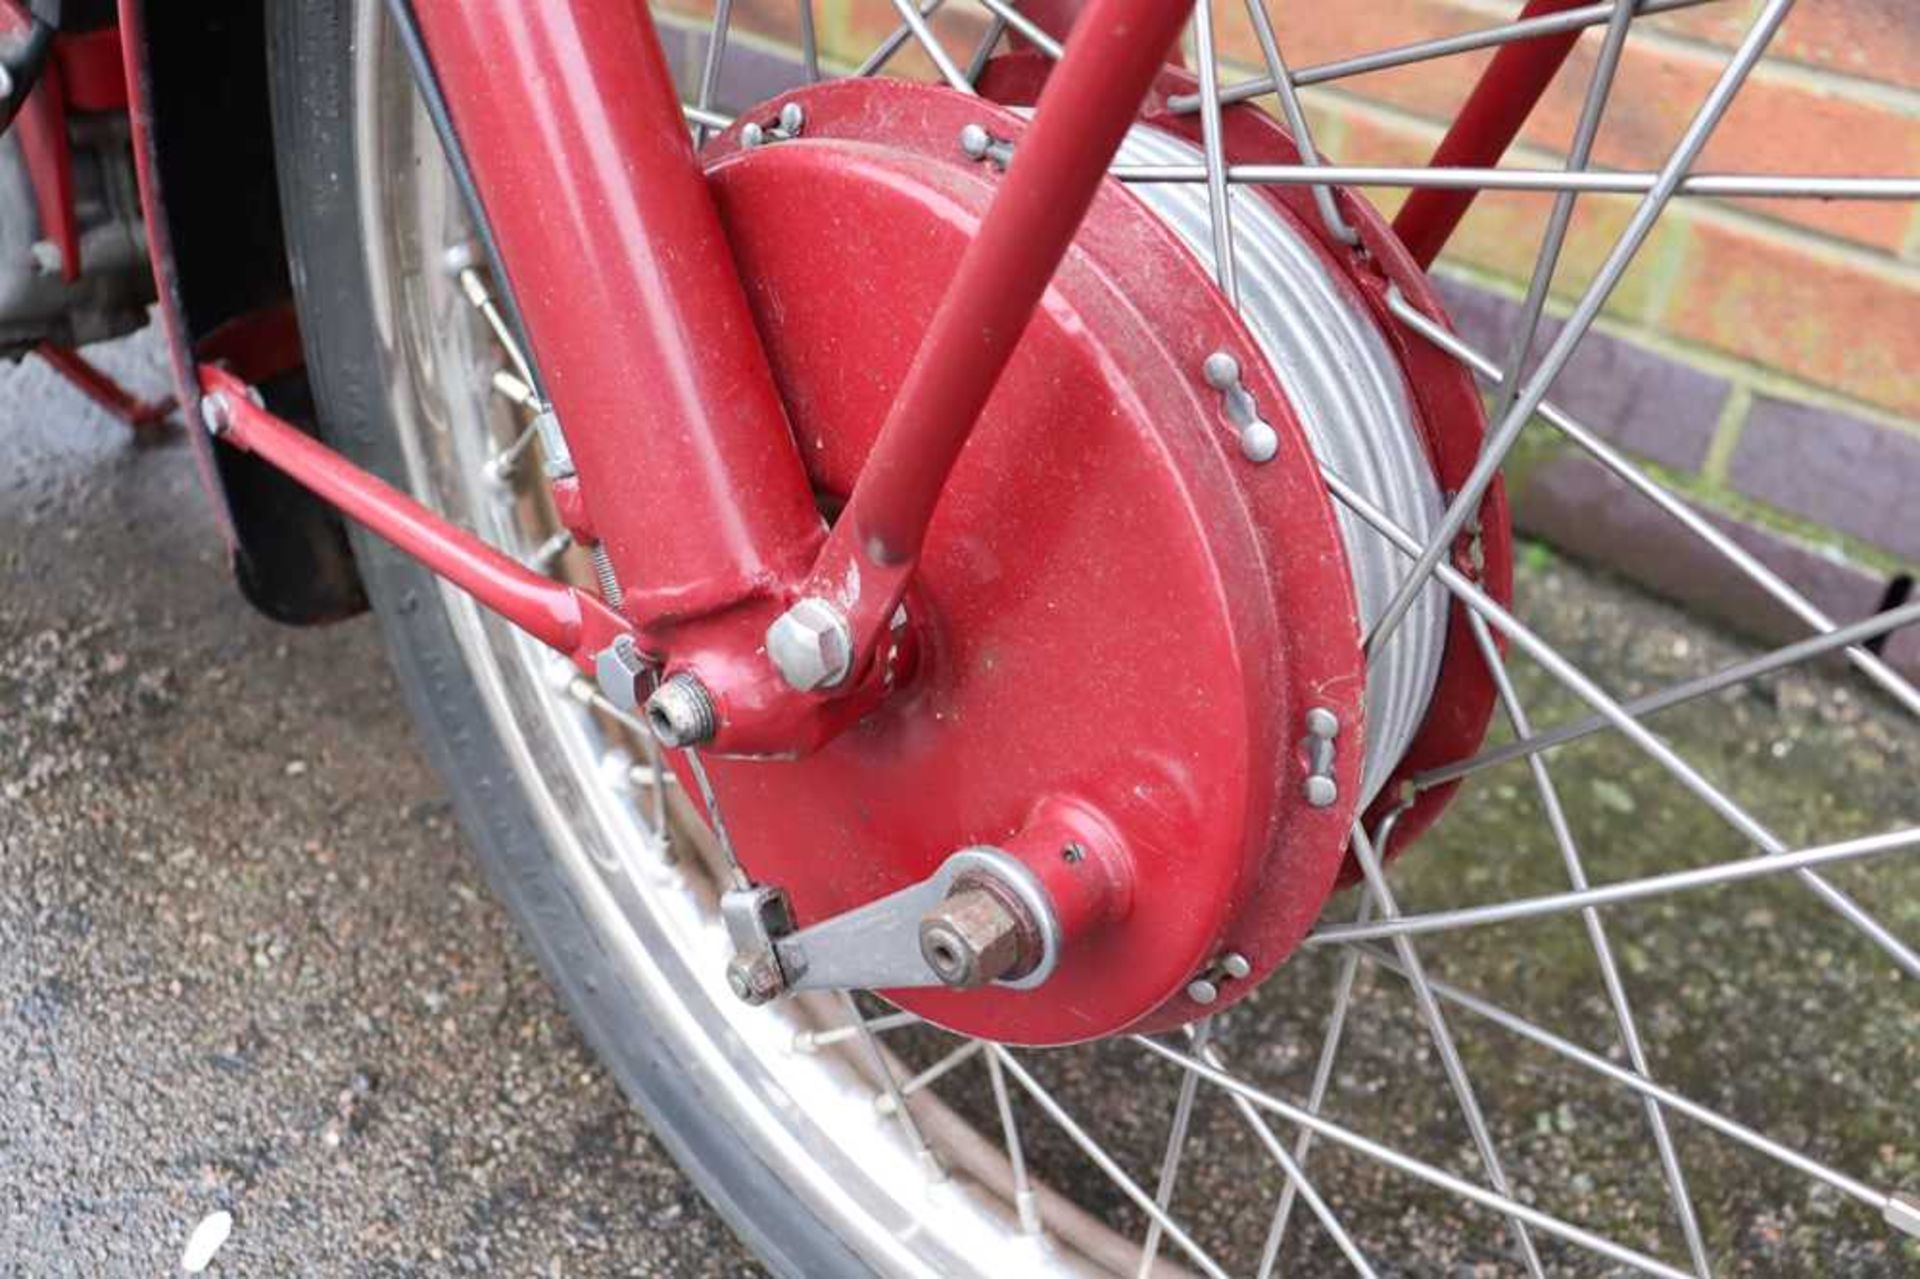 1956 BSA C12 Stainless steel rims and spokes - Image 25 of 44